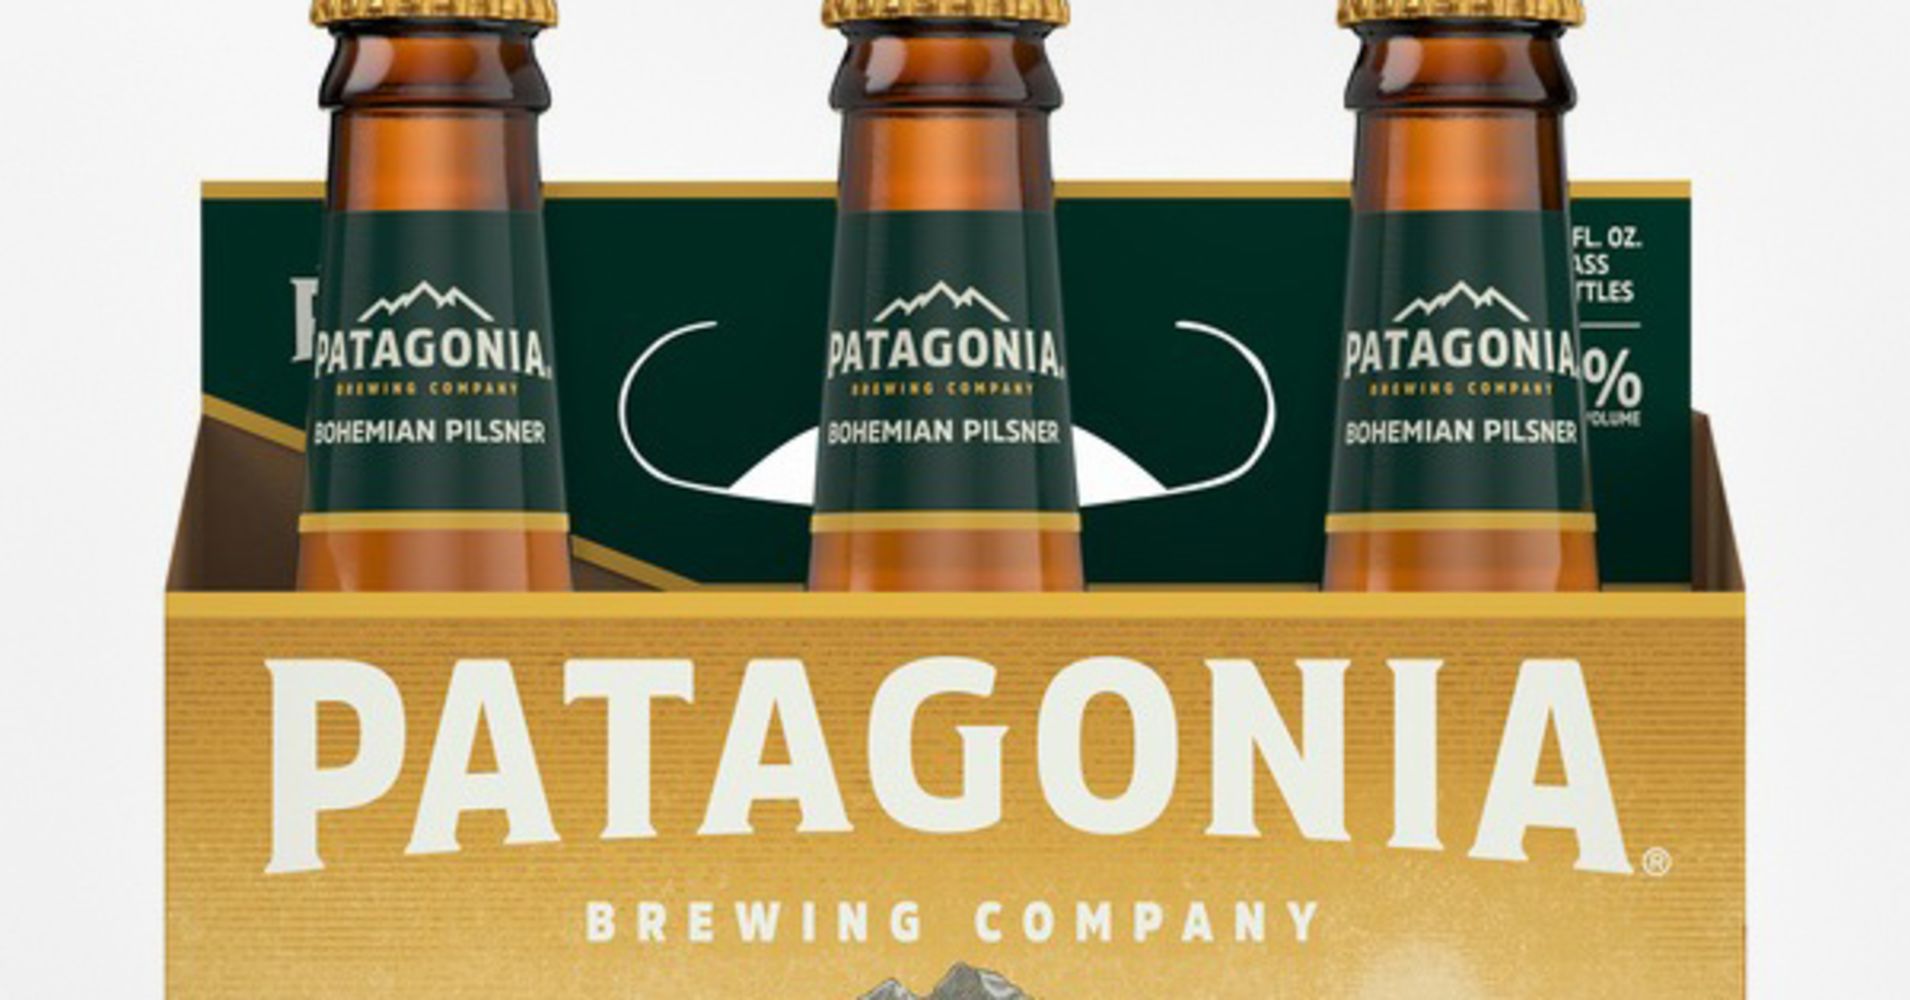 Patagonia sues Budweiser's parent for its 'copycat' beer brand